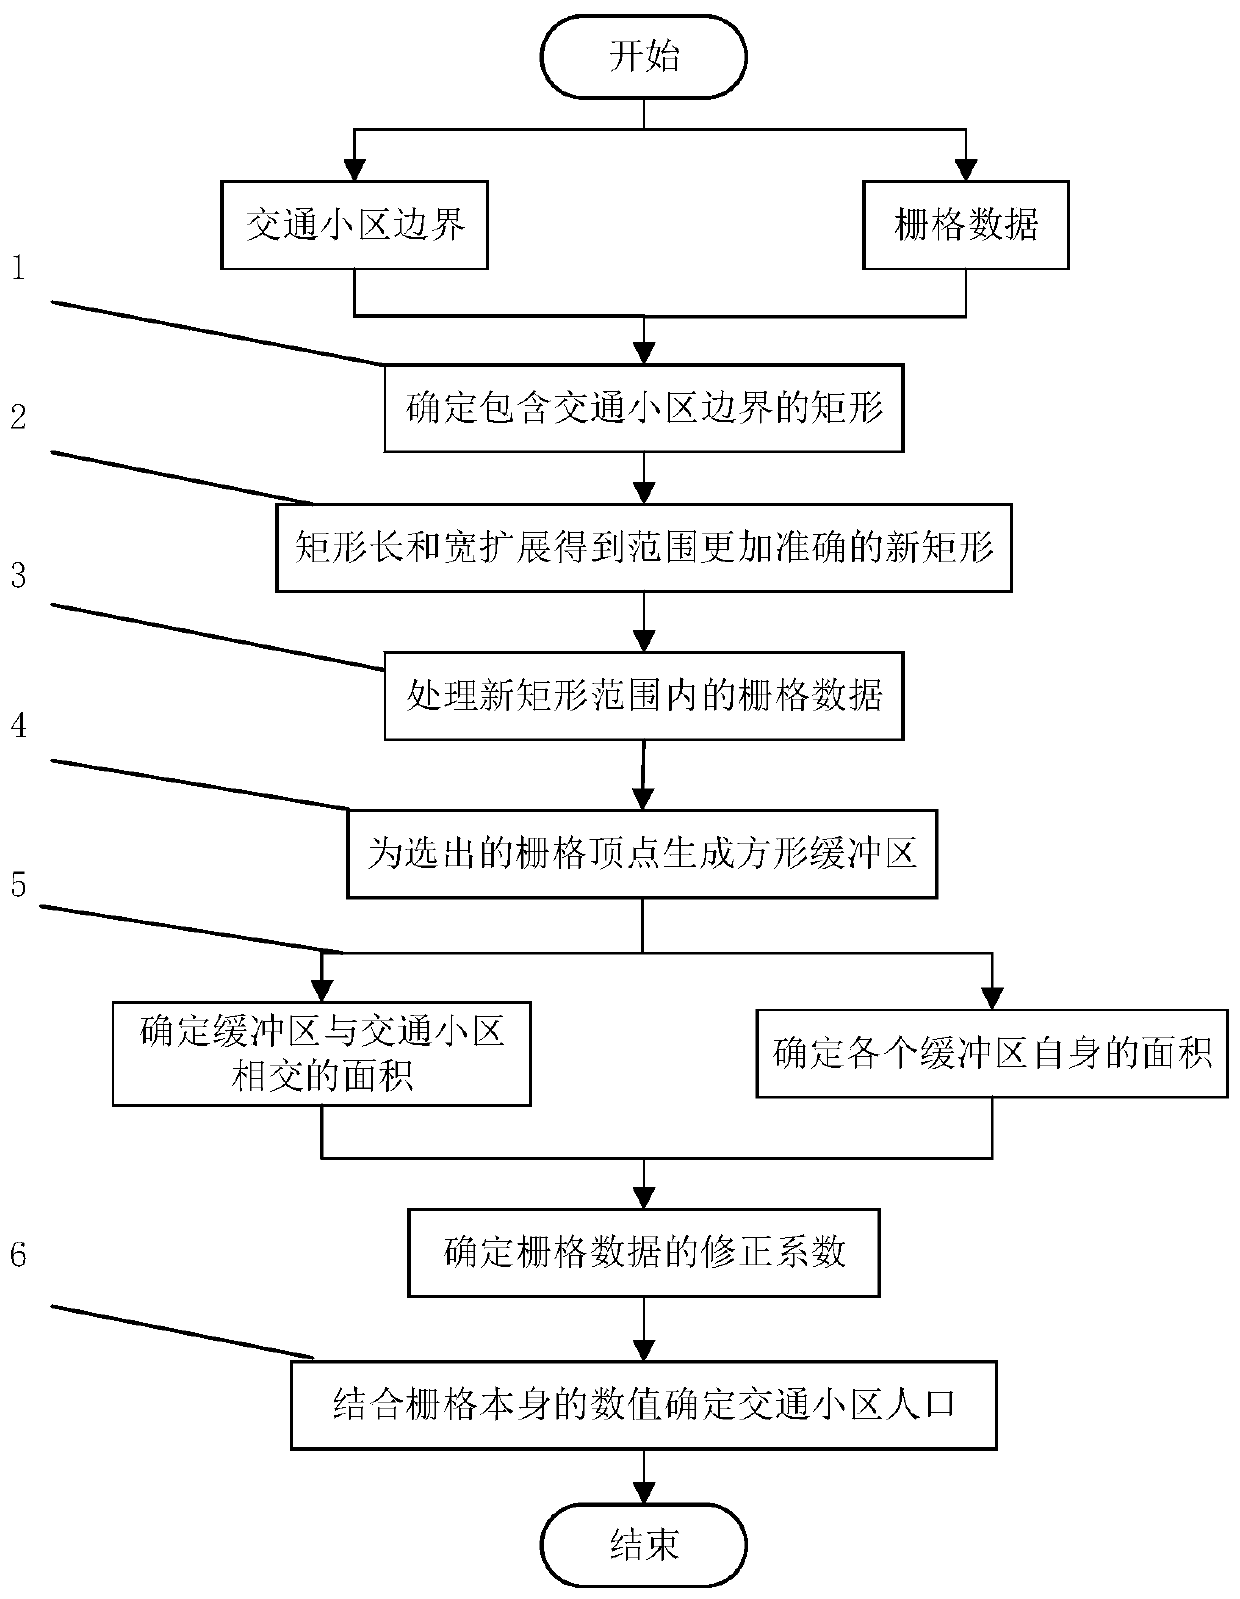 Traffic cell demographic method based on raster data and area ratio correction